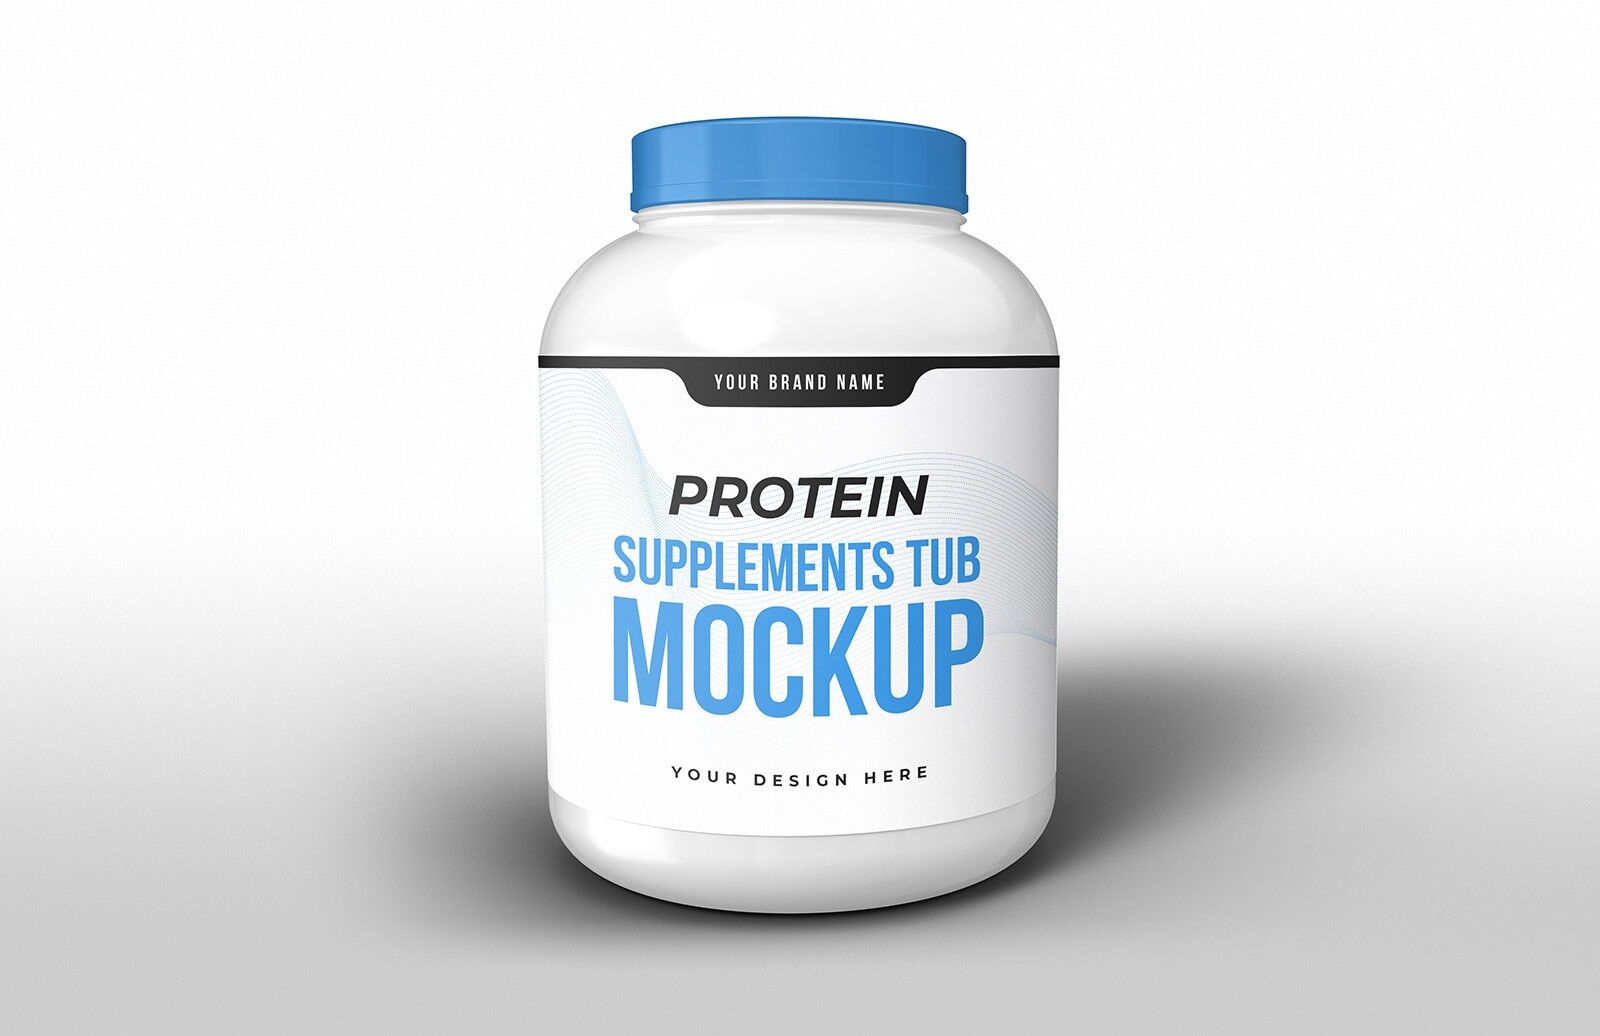 Short Rounded Protein Supplements Tub Mockup FREE PSD